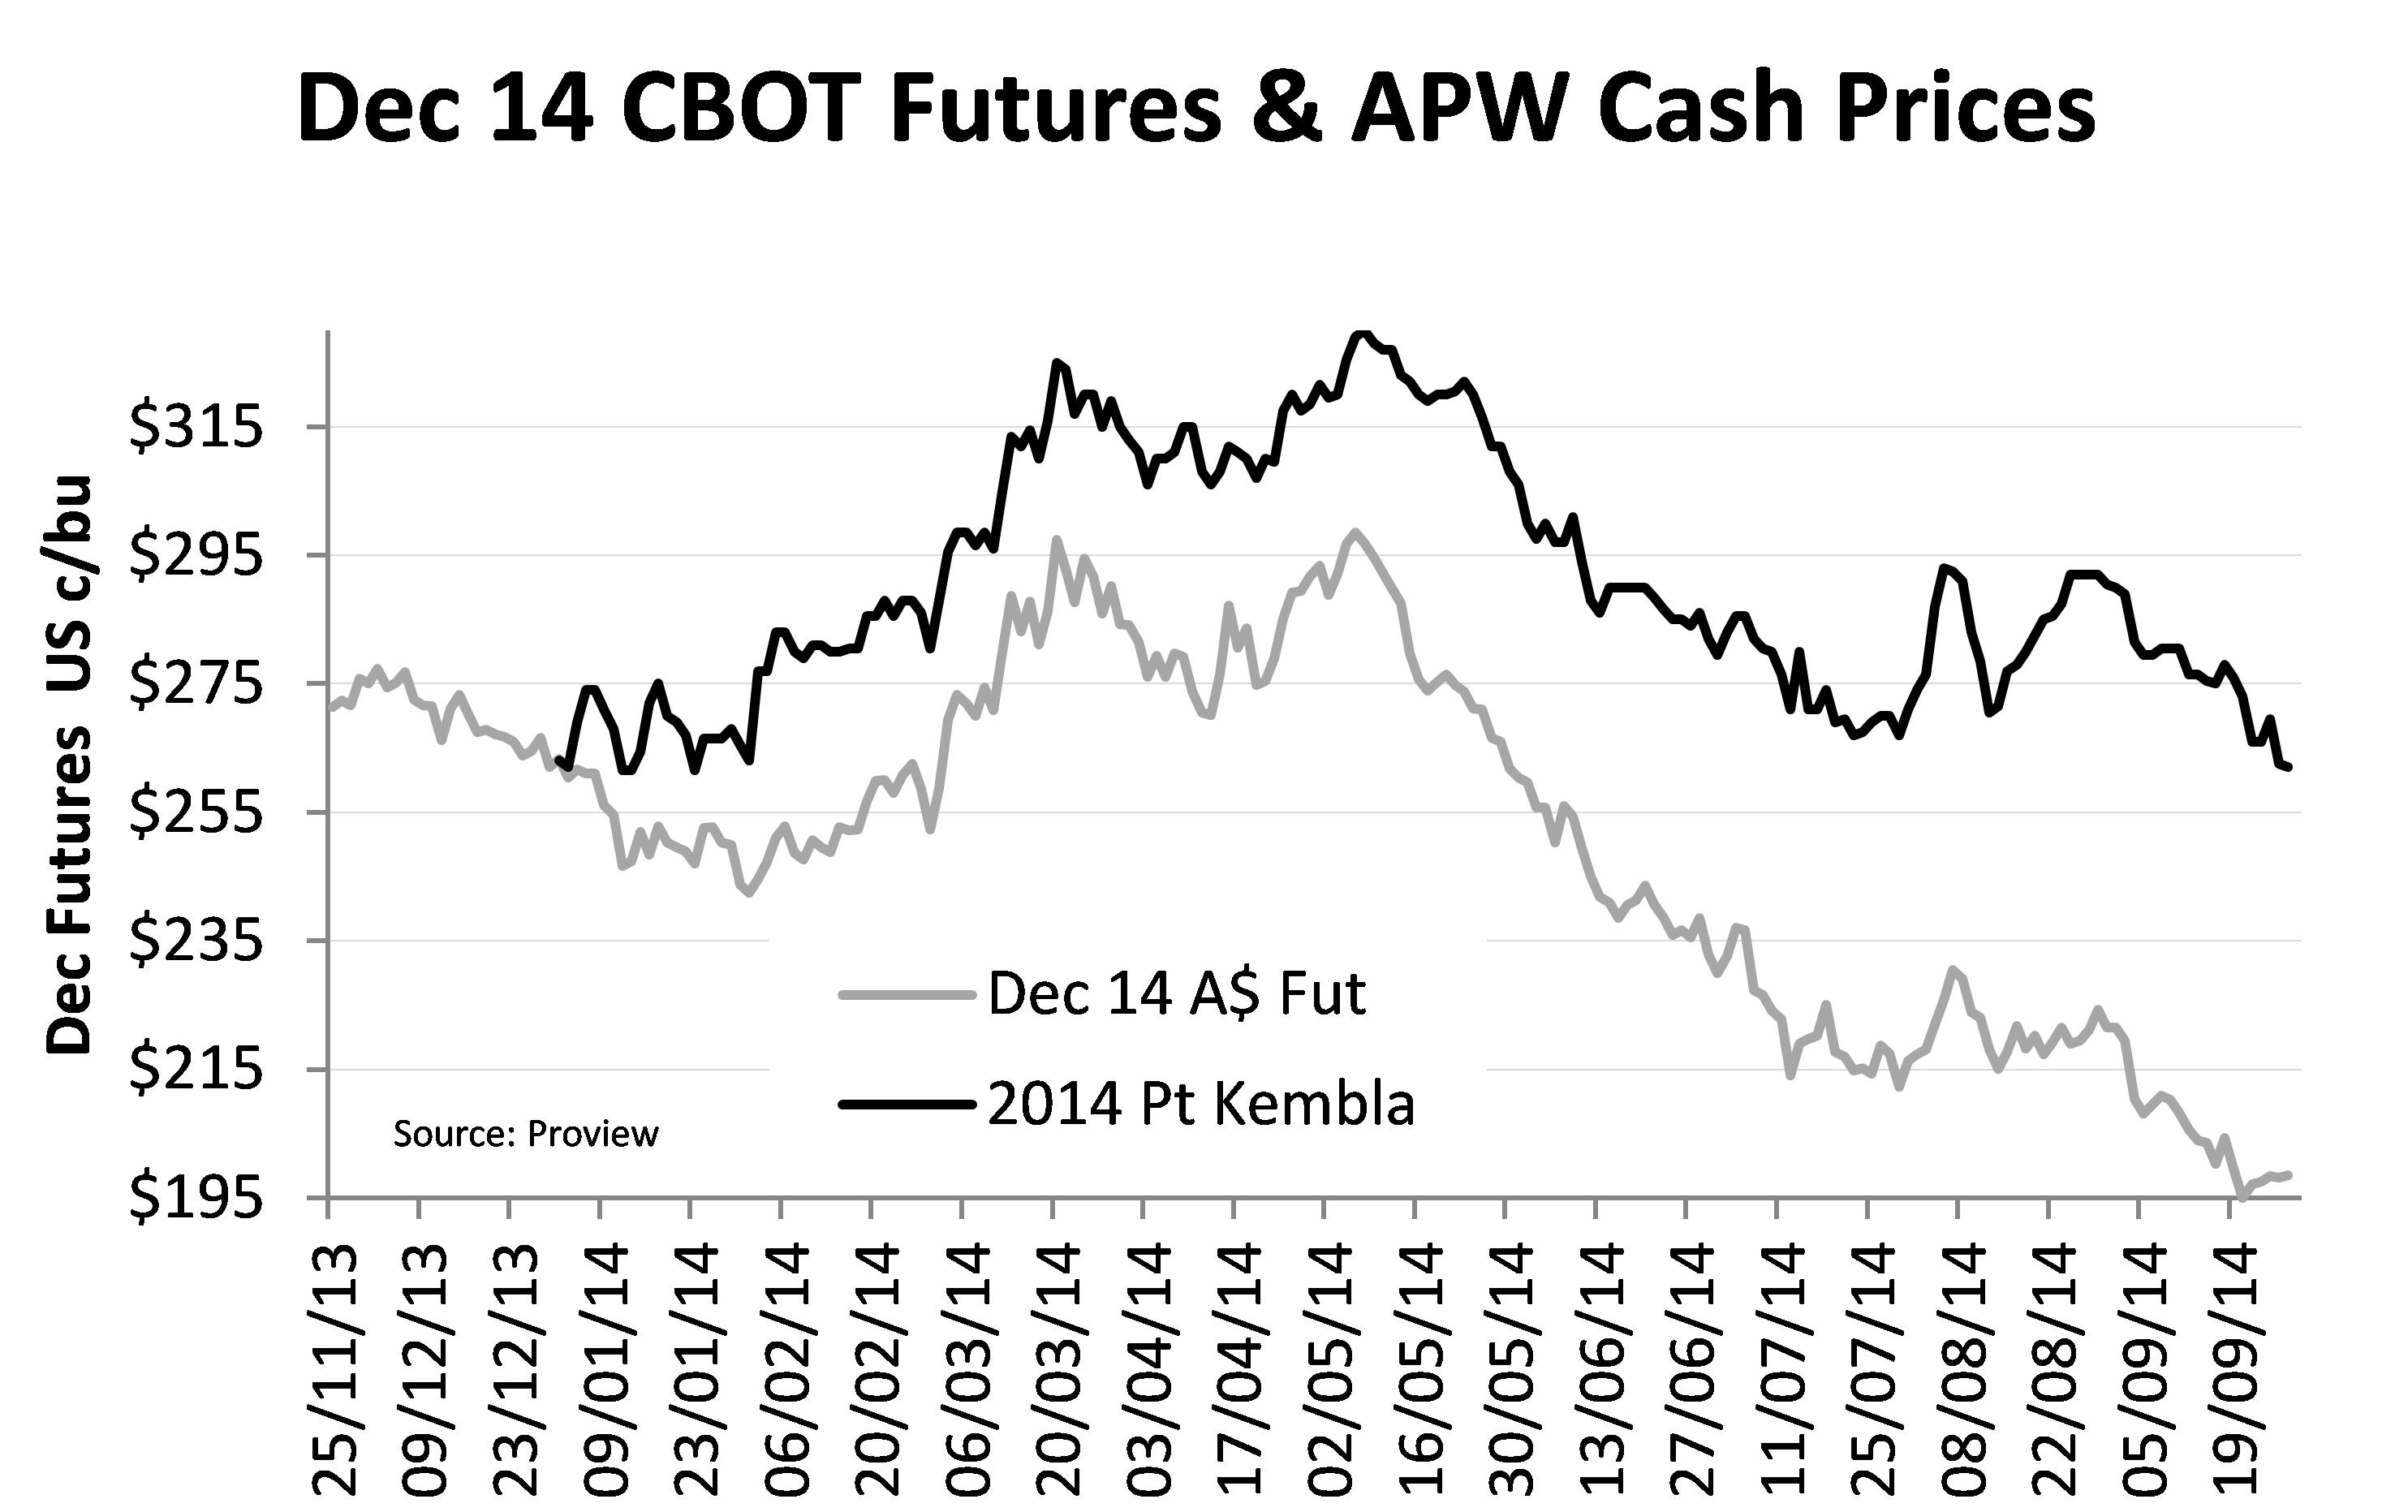 Figure 6. December 2014 CBOT futures and APW cash prices.